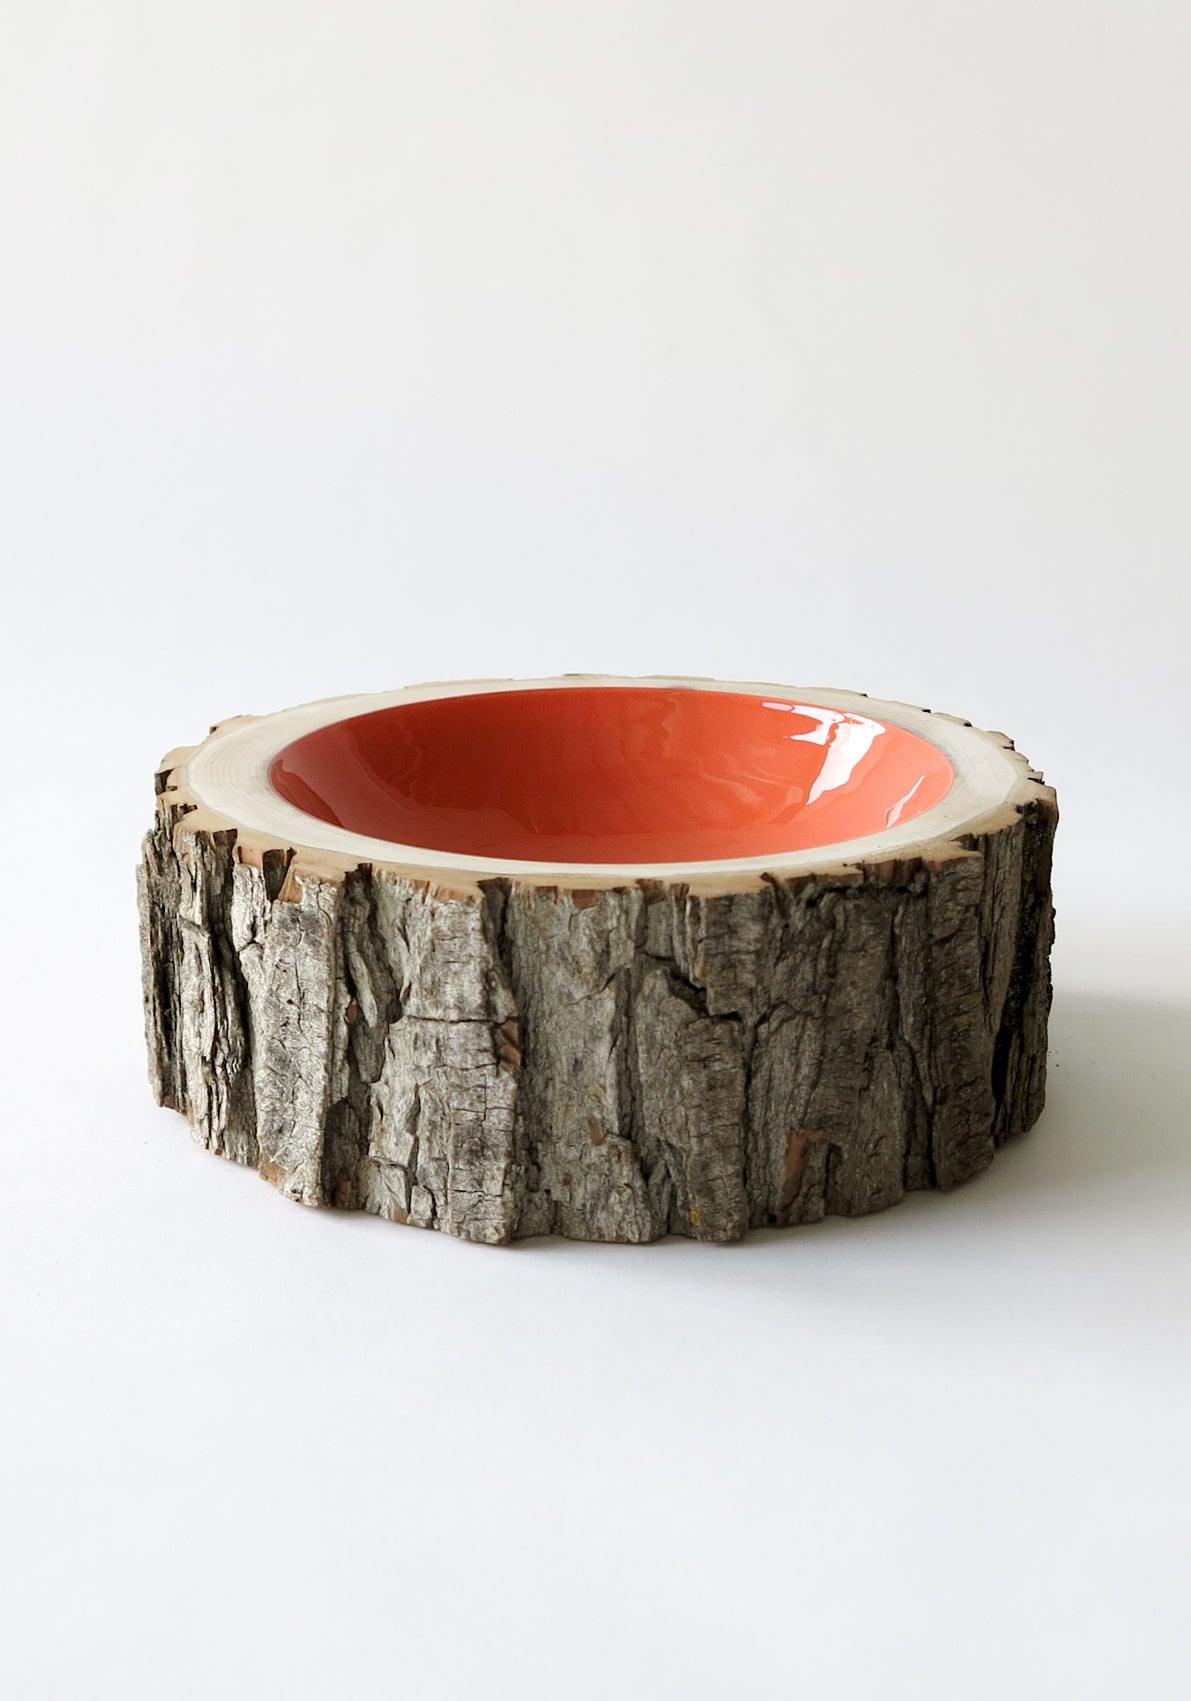 Size 11 Log Bowl - Extra Large Wooden Bowl with rough bark, glossy interior is a coral colour..